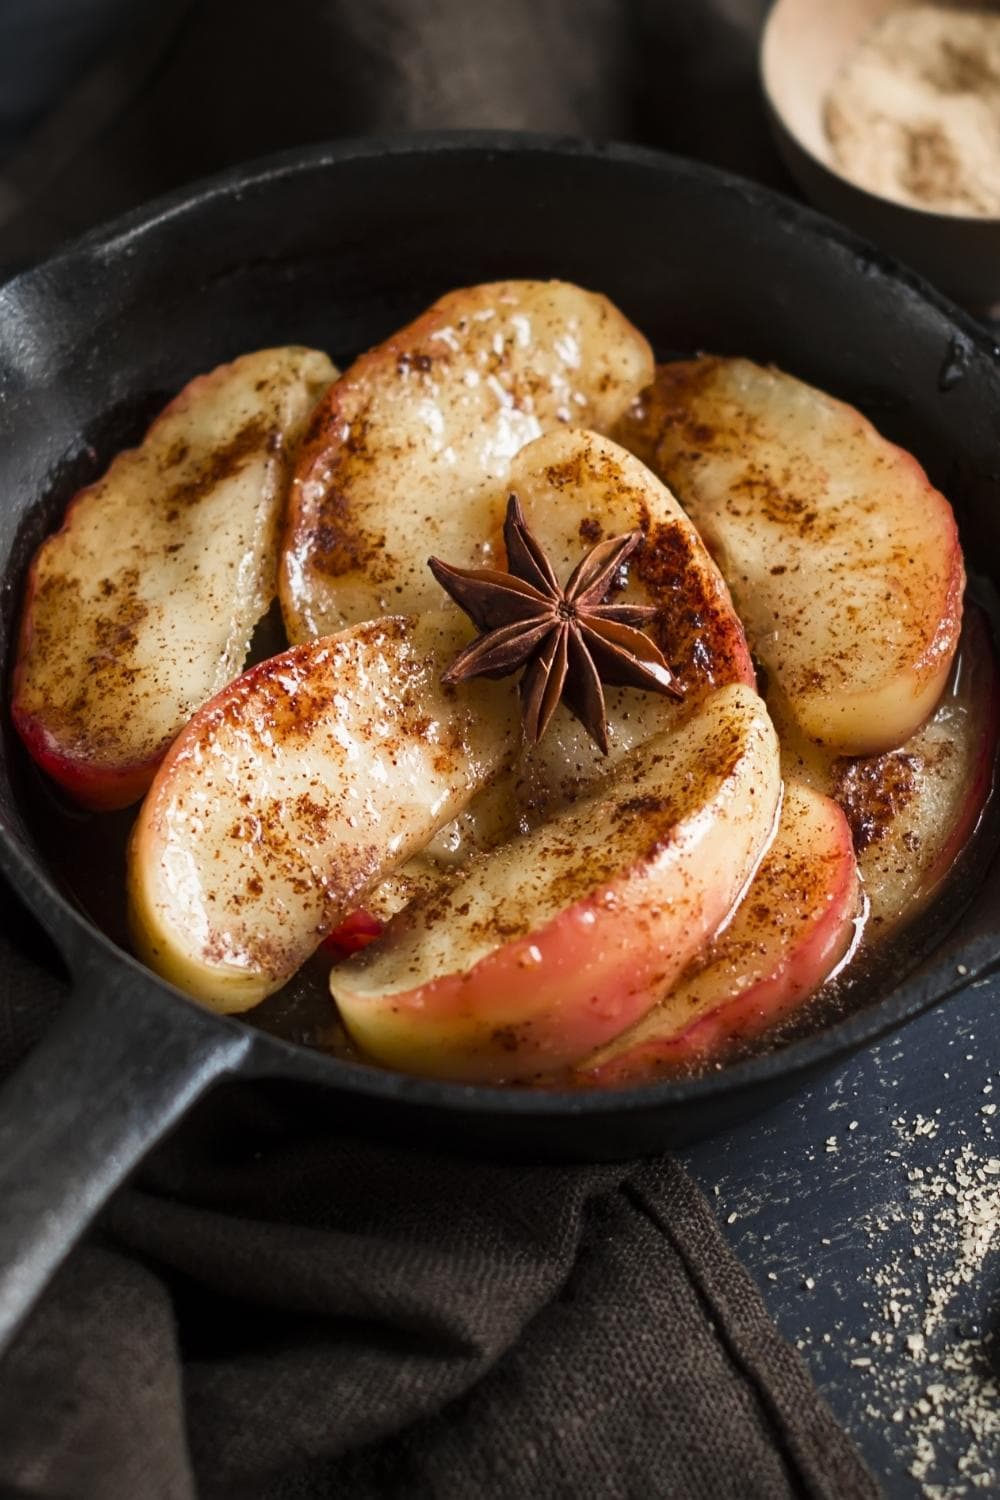 Caramelized Apples with Cinnamon in a Skillet